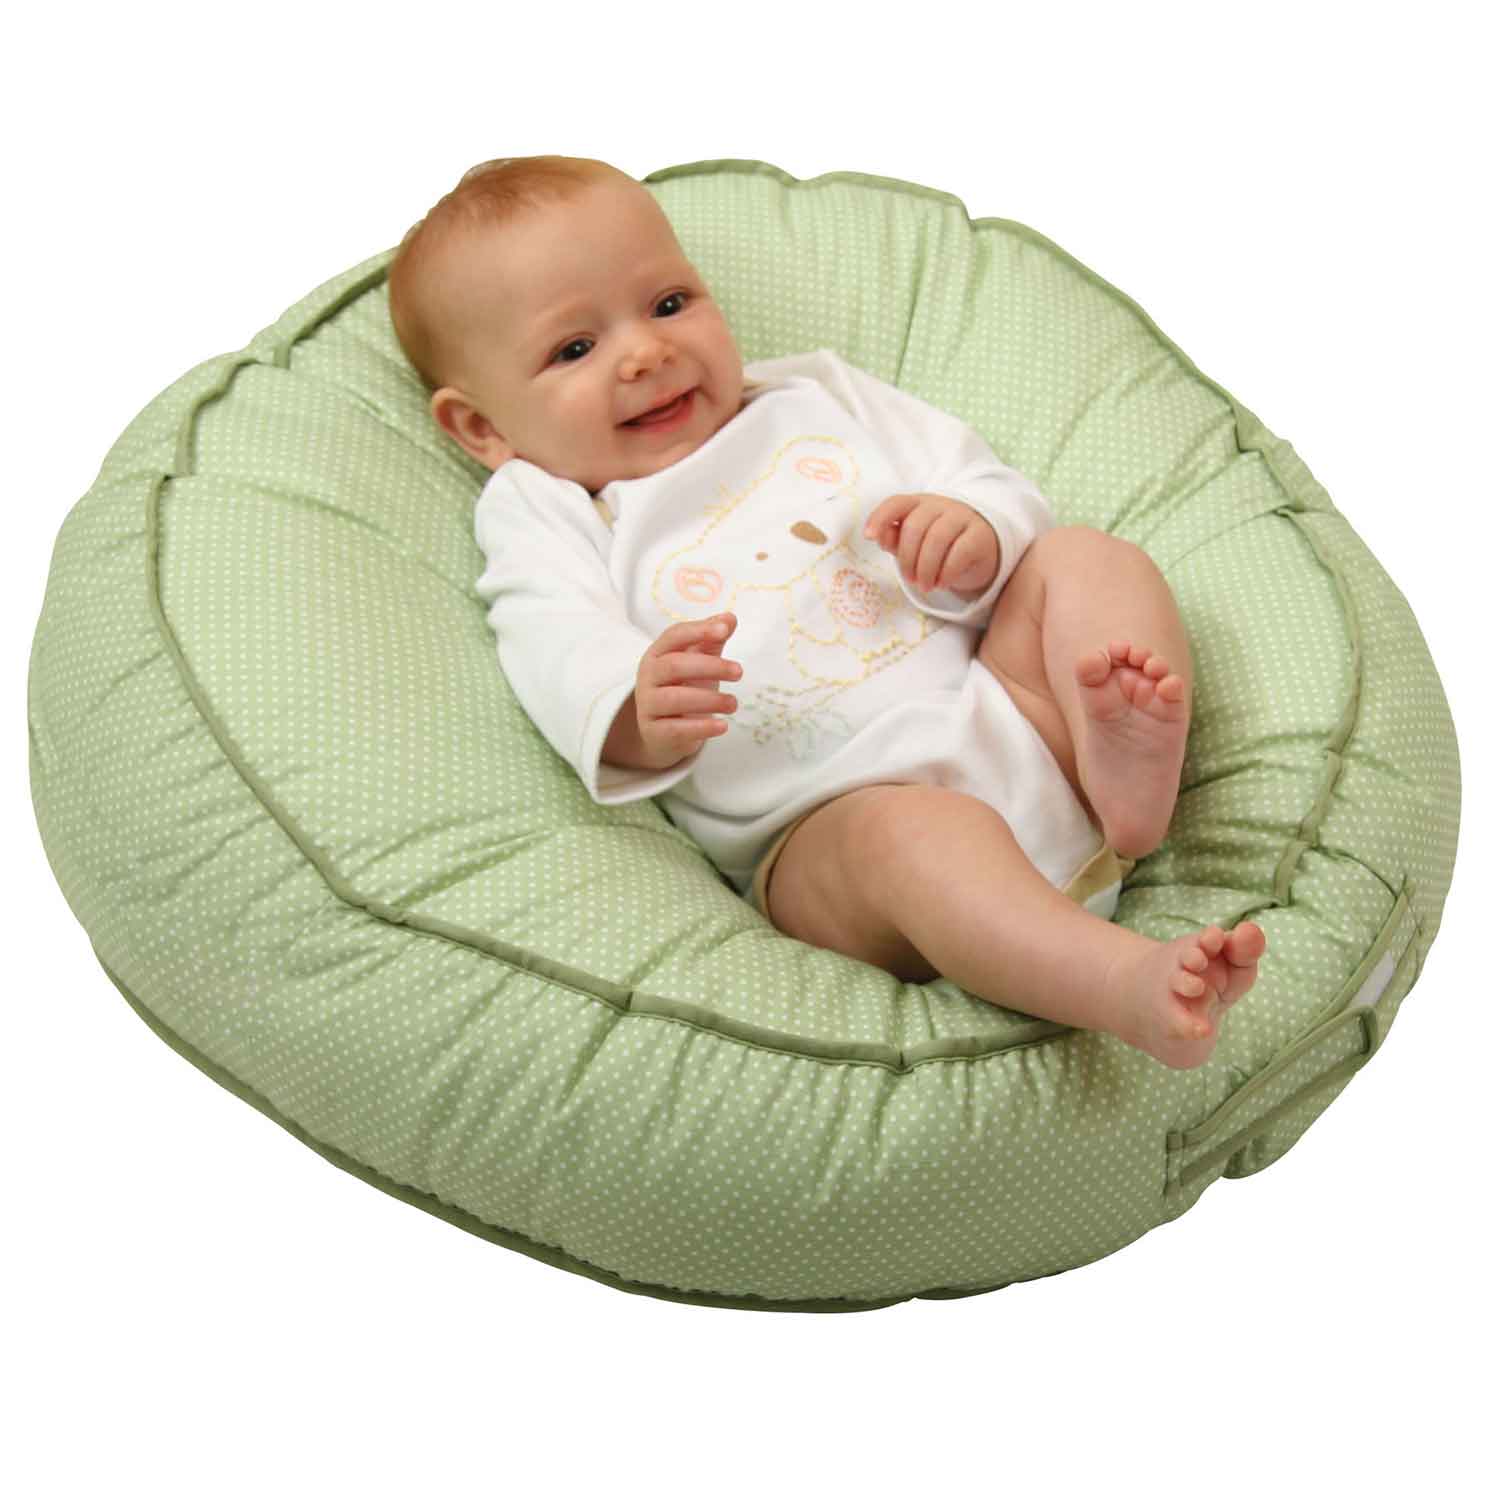 Baby Lounger Pillow-Baby Lounger with Built in Safety Restraint to Keep Your Baby Comfortable & Safe 